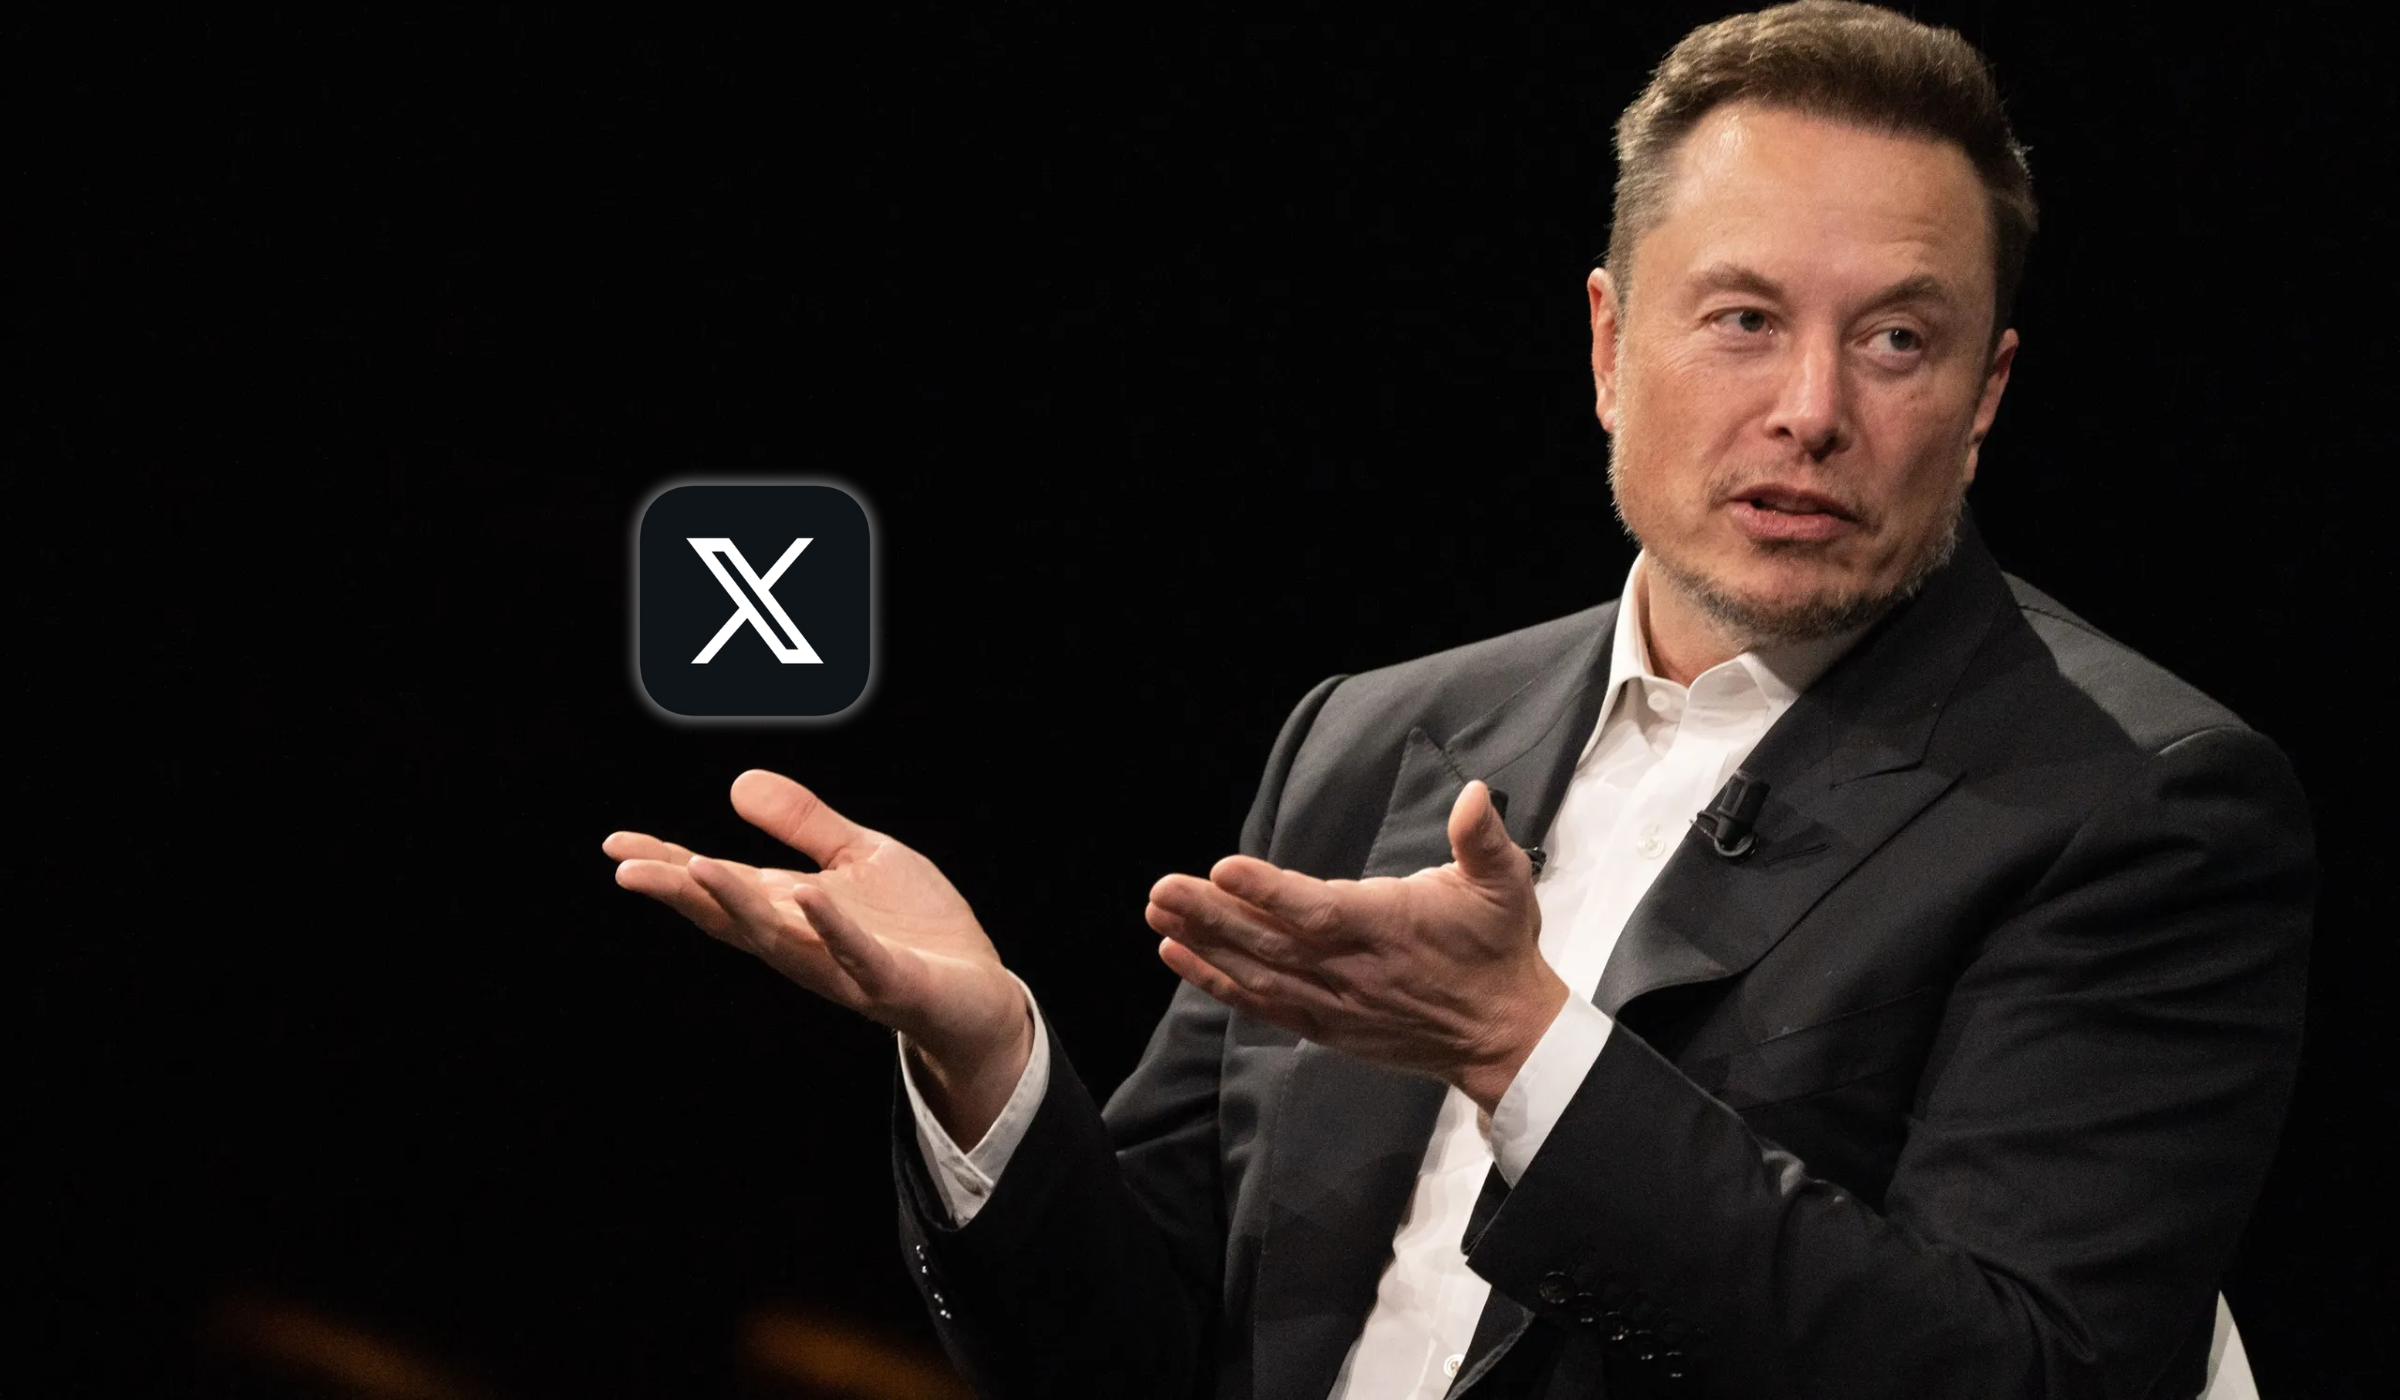 Photo of X owner Elon Musk holding the platform's logo in his hand.